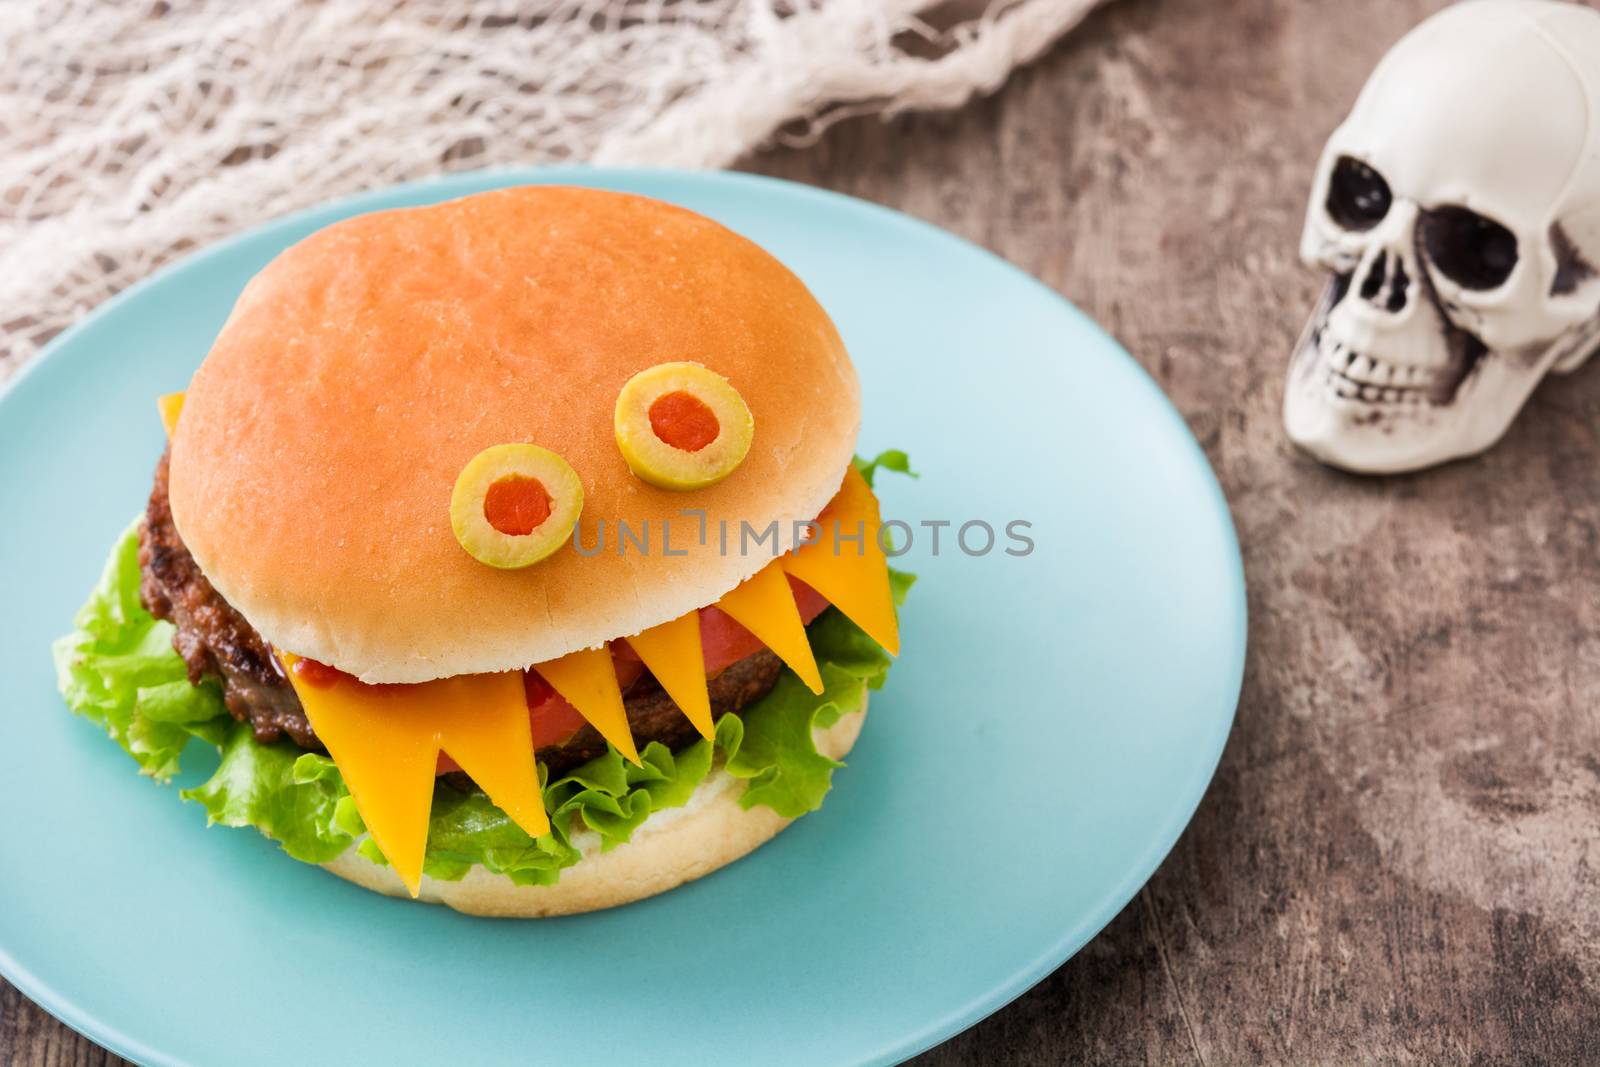 Halloween burger monsters on wooden table by chandlervid85